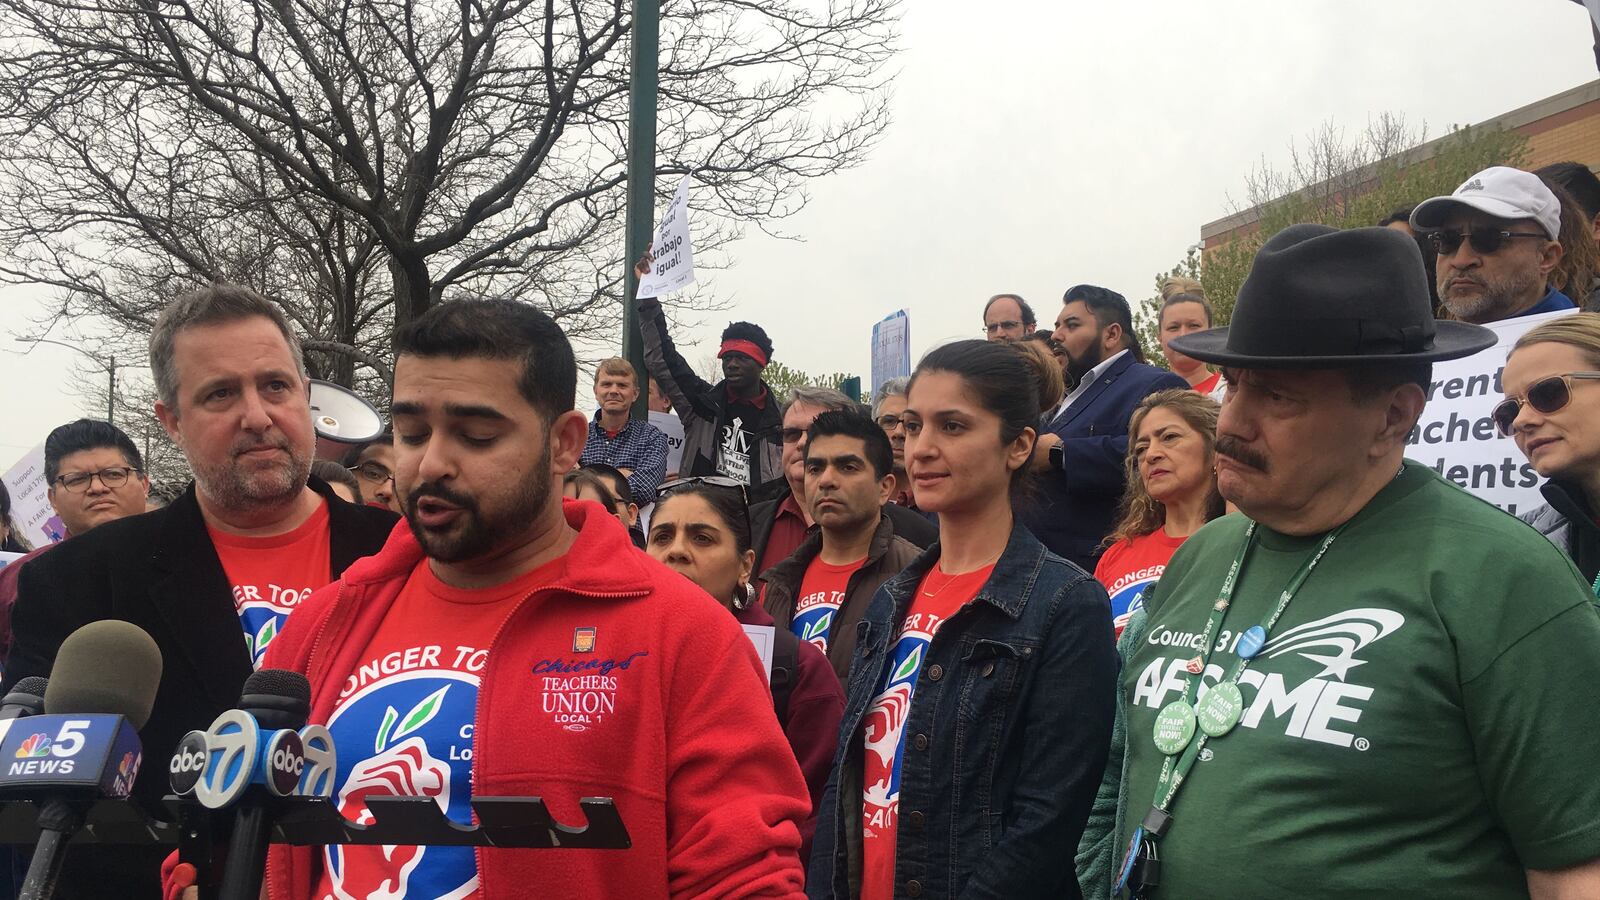 Chicago charter teacher Mihir Garud speaks at a press conference April 25, 2019, announcing a May 1 strike date if negotiations remain stalled.